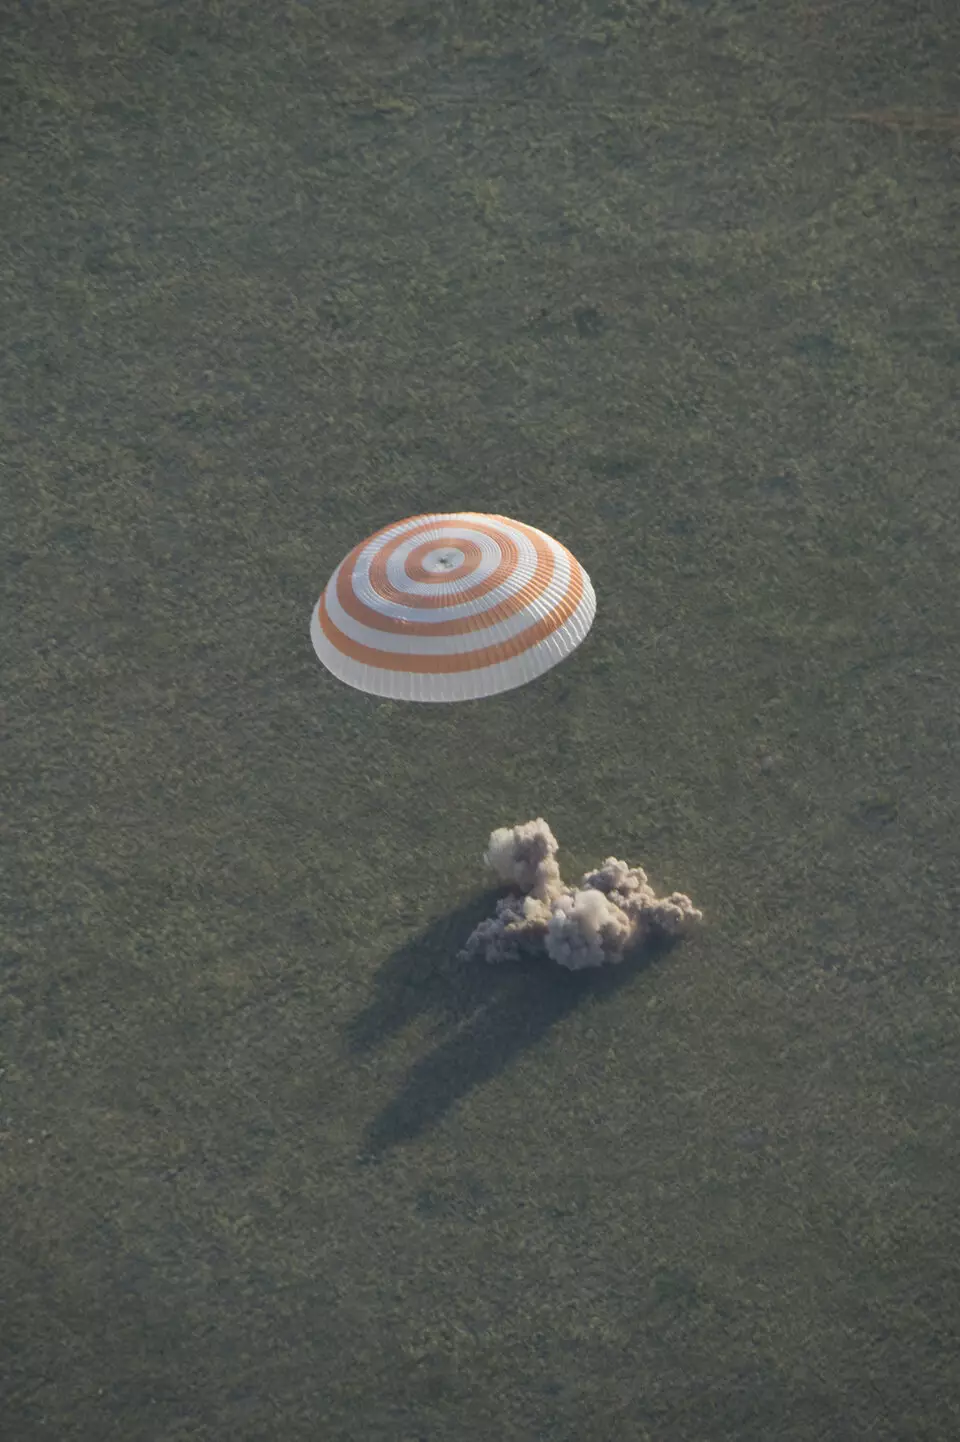 The Soyuz TMA-15M spacecraft safely landed back on Earth on 11 June 2015, after Cristoforetti had spent almost 200 days in space.